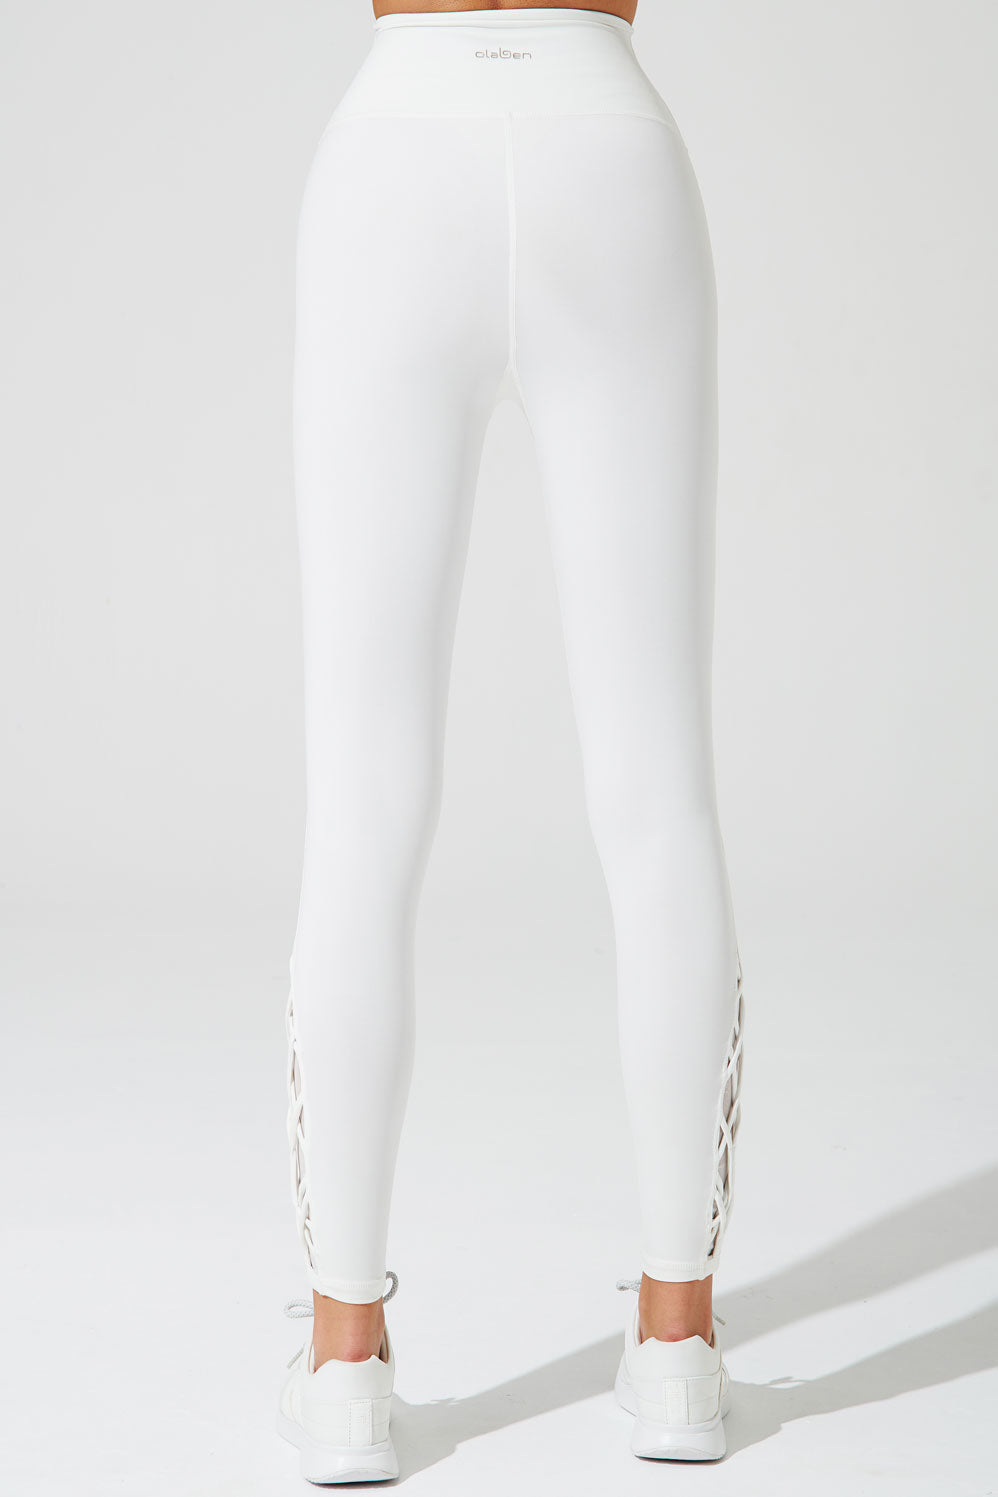 White high-waist leggings for women, perfect for a stylish and comfortable look.